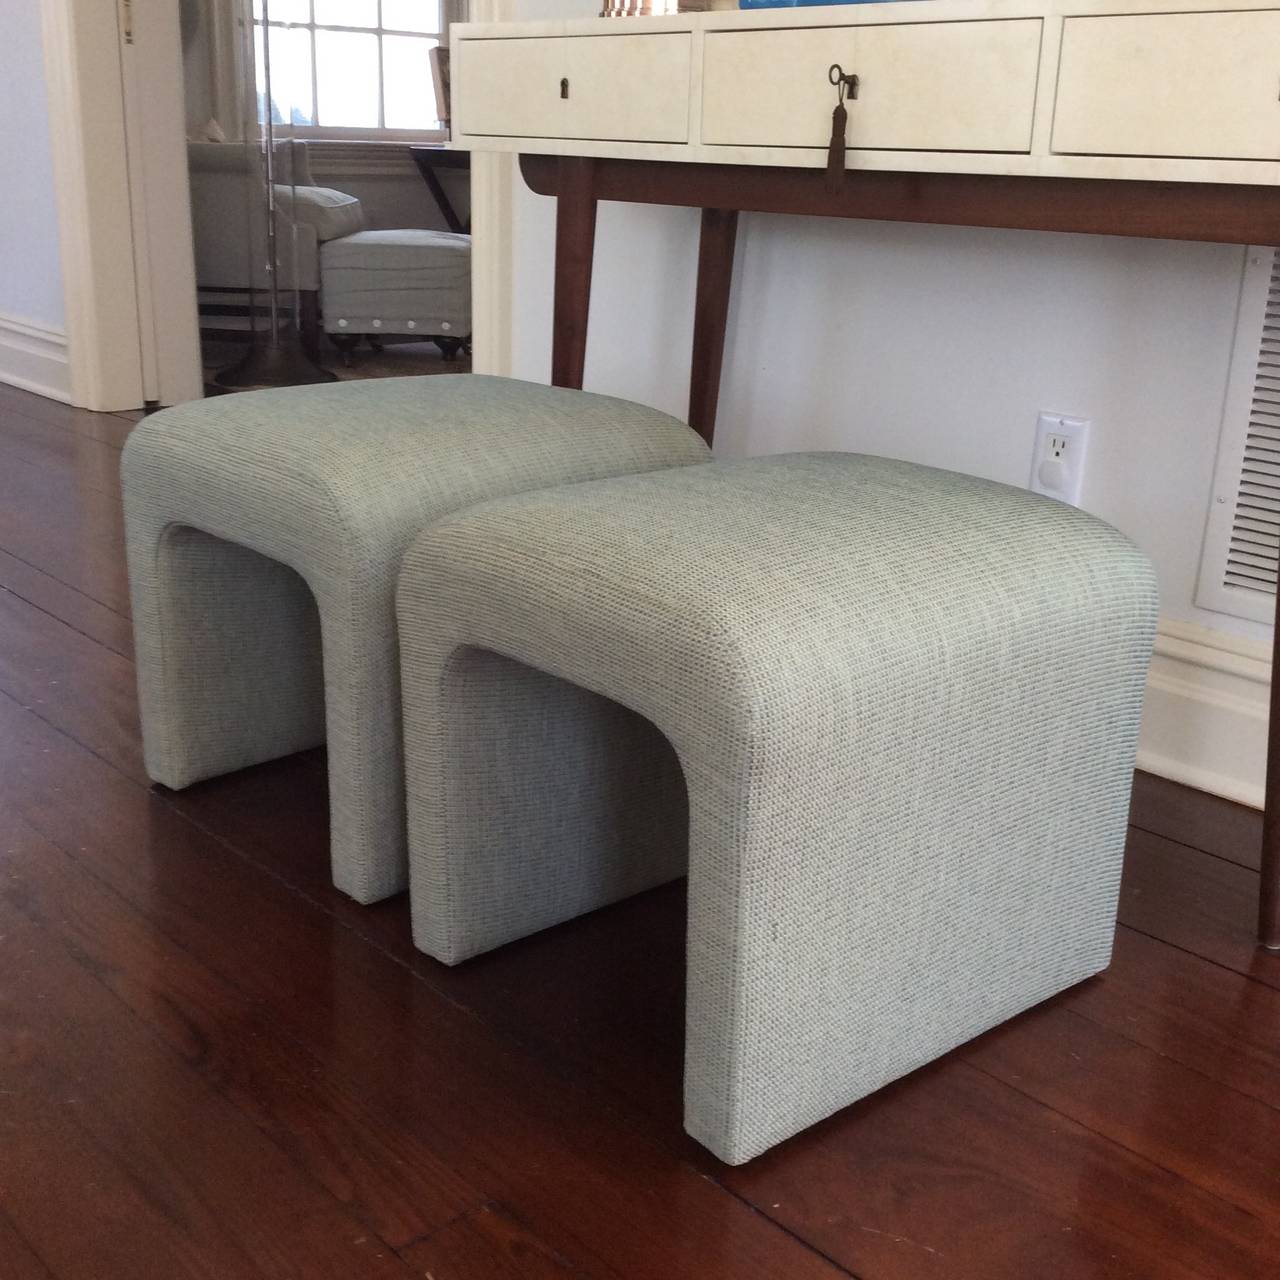 Pair of newly reupholstered waterfall ottomans circa 1970s. New foam on frame and  newly upholstered in Blue/green Kravet tweed fabric.  Versatile form to use a pull up seating or tuck away under a chic console table.